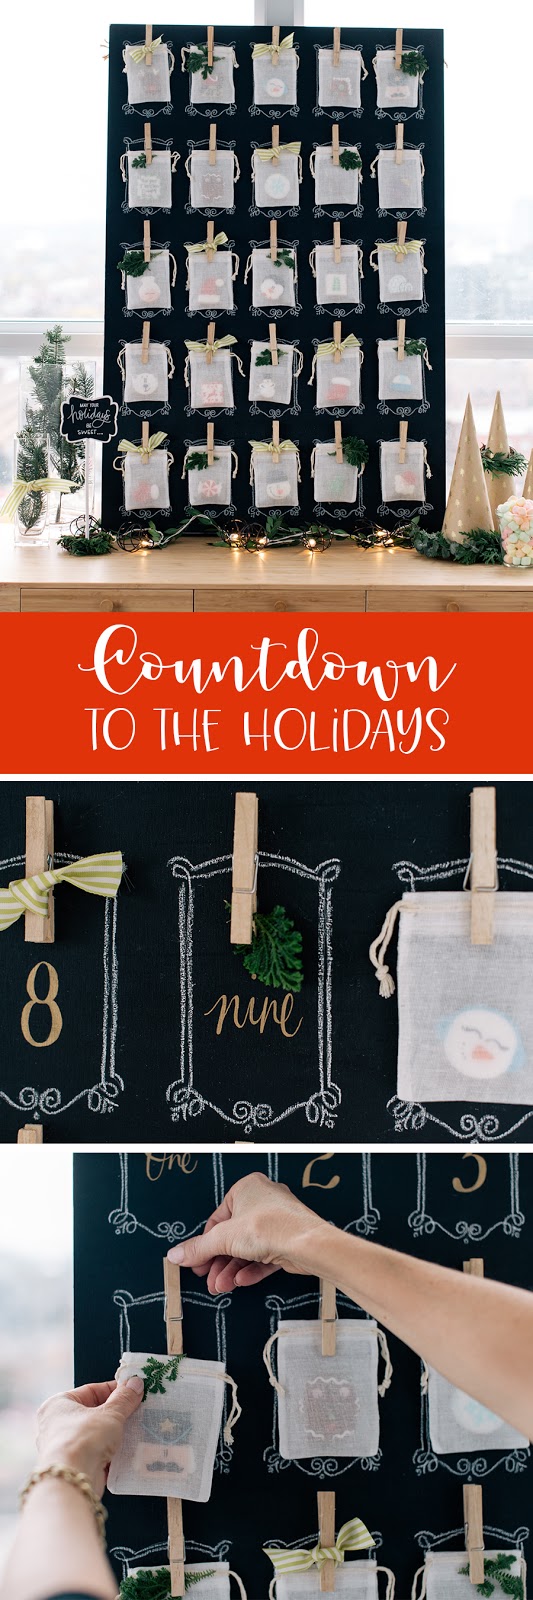 sweet countdown to the holiday idea using mini advent cookies and muslin bags | creativebag.com